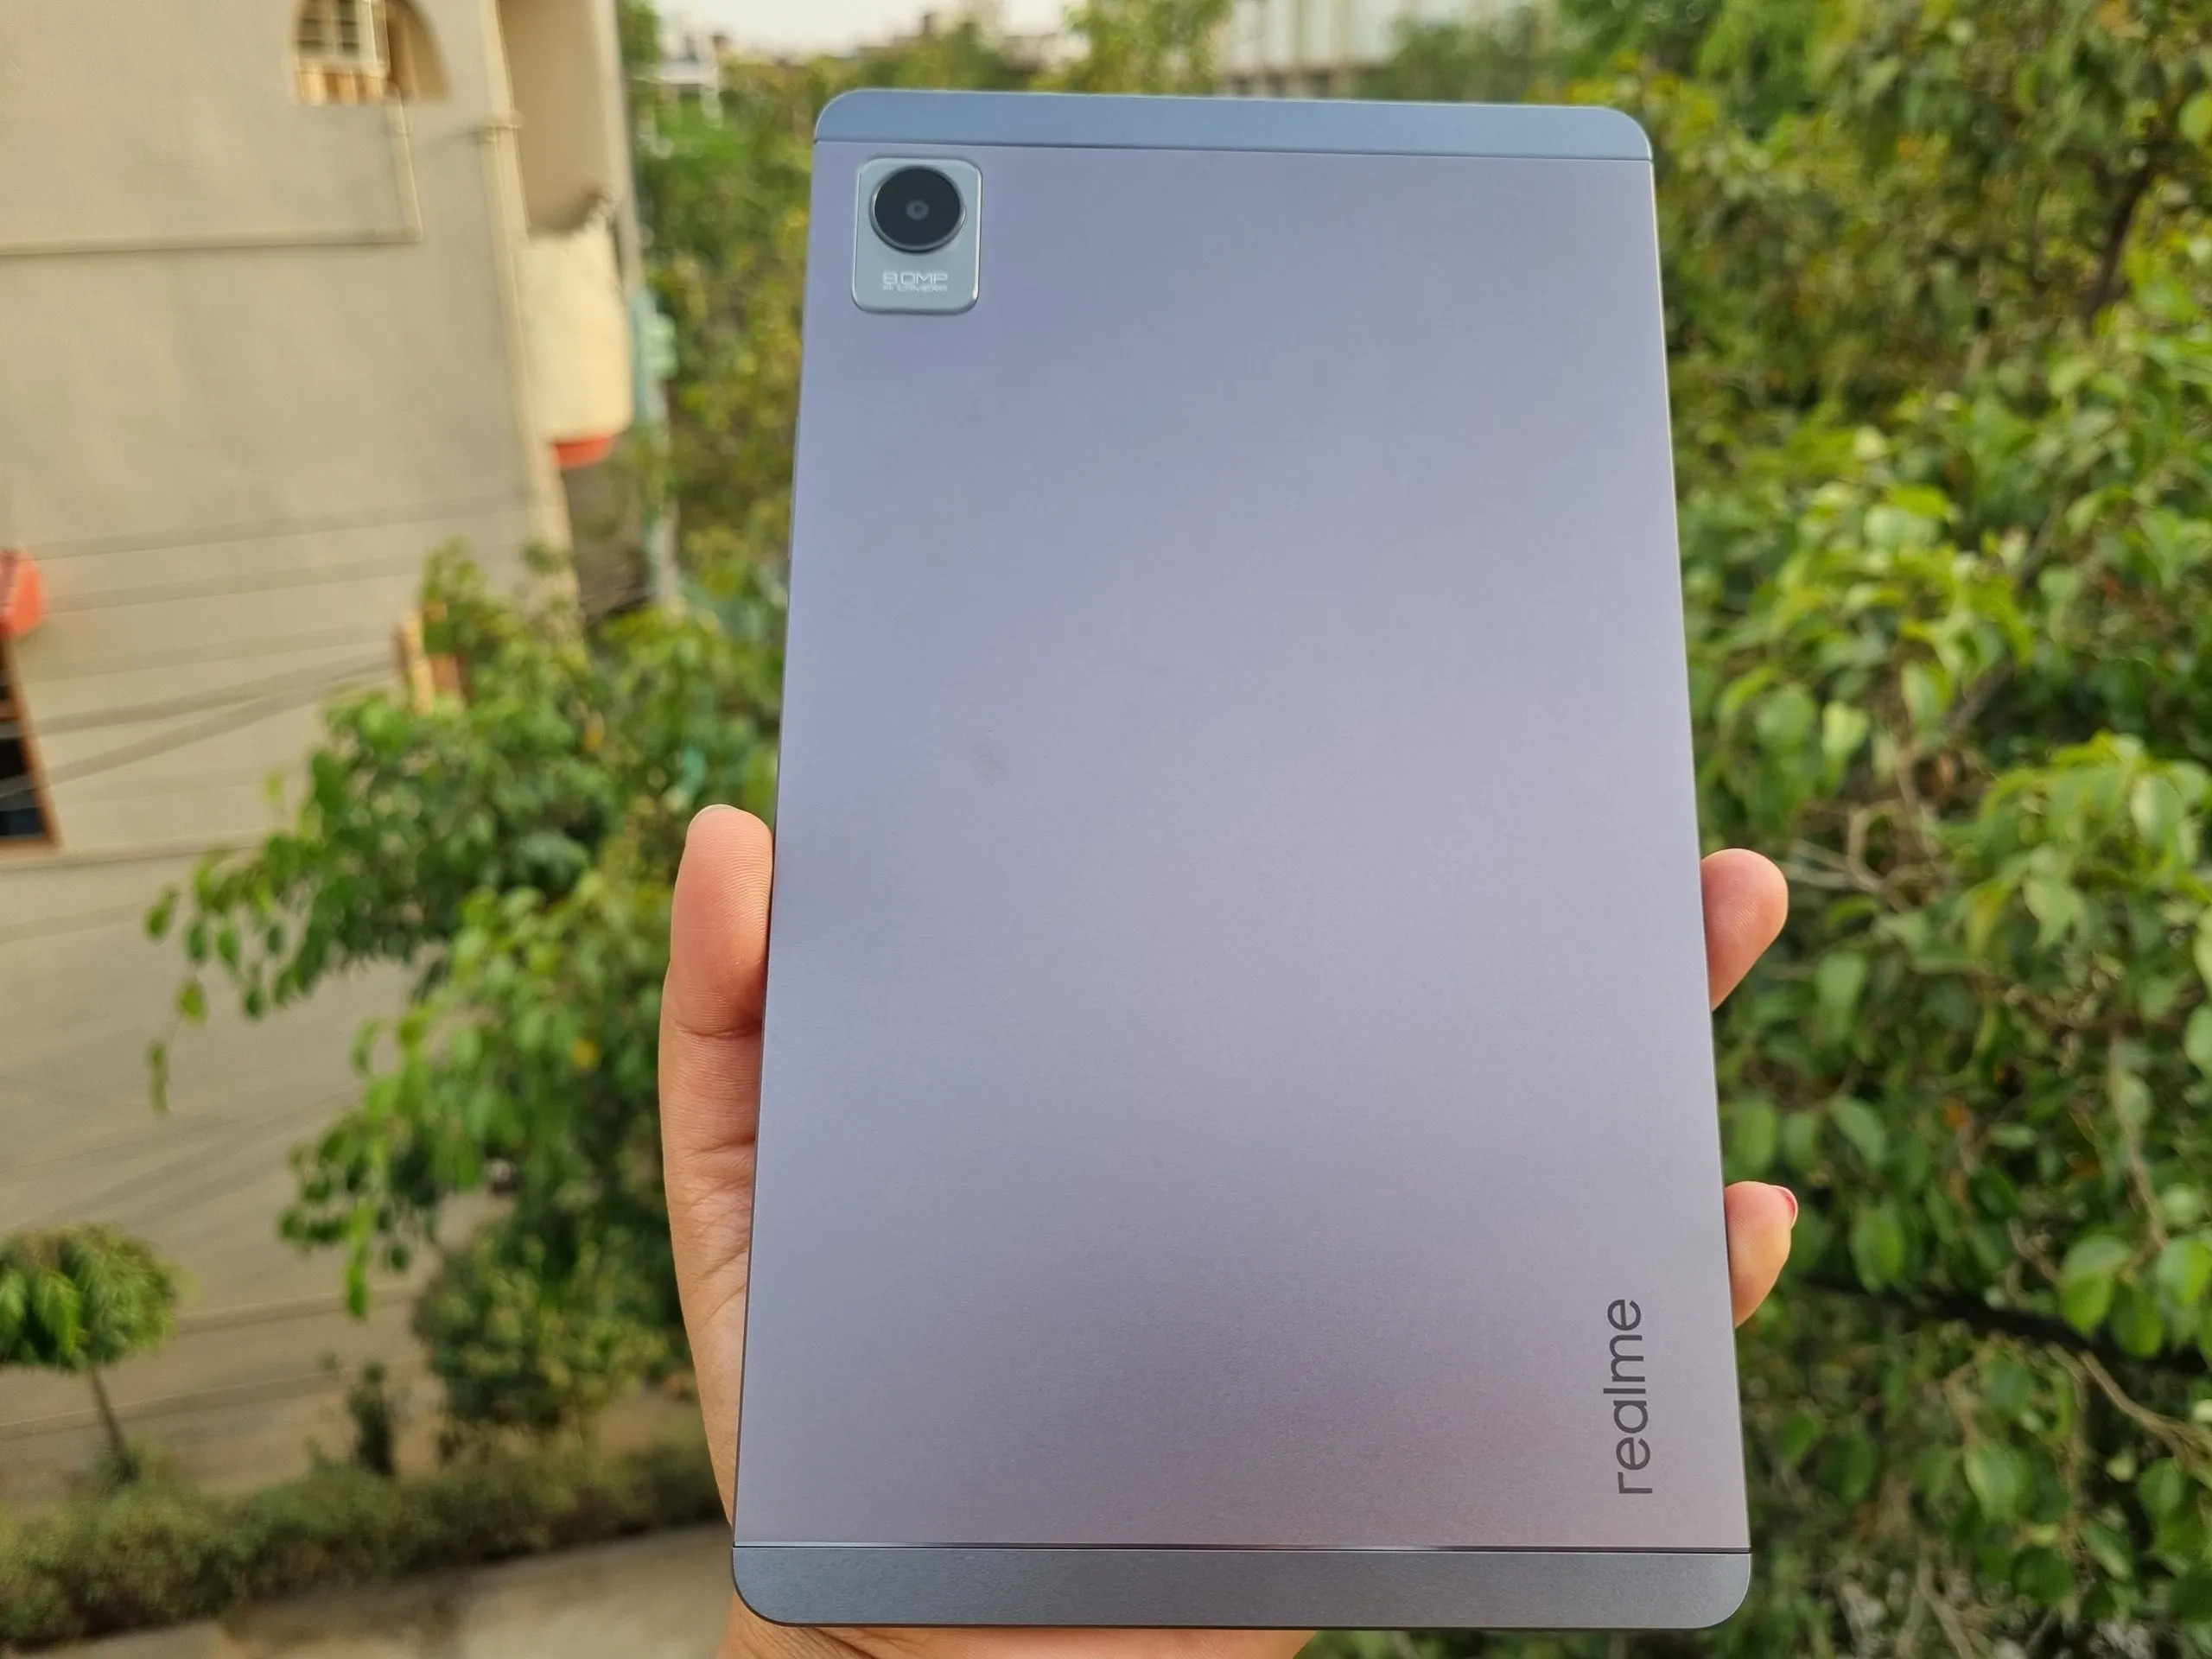 Realme Pad Review: A Budget Tablet That's Built for Entertainment